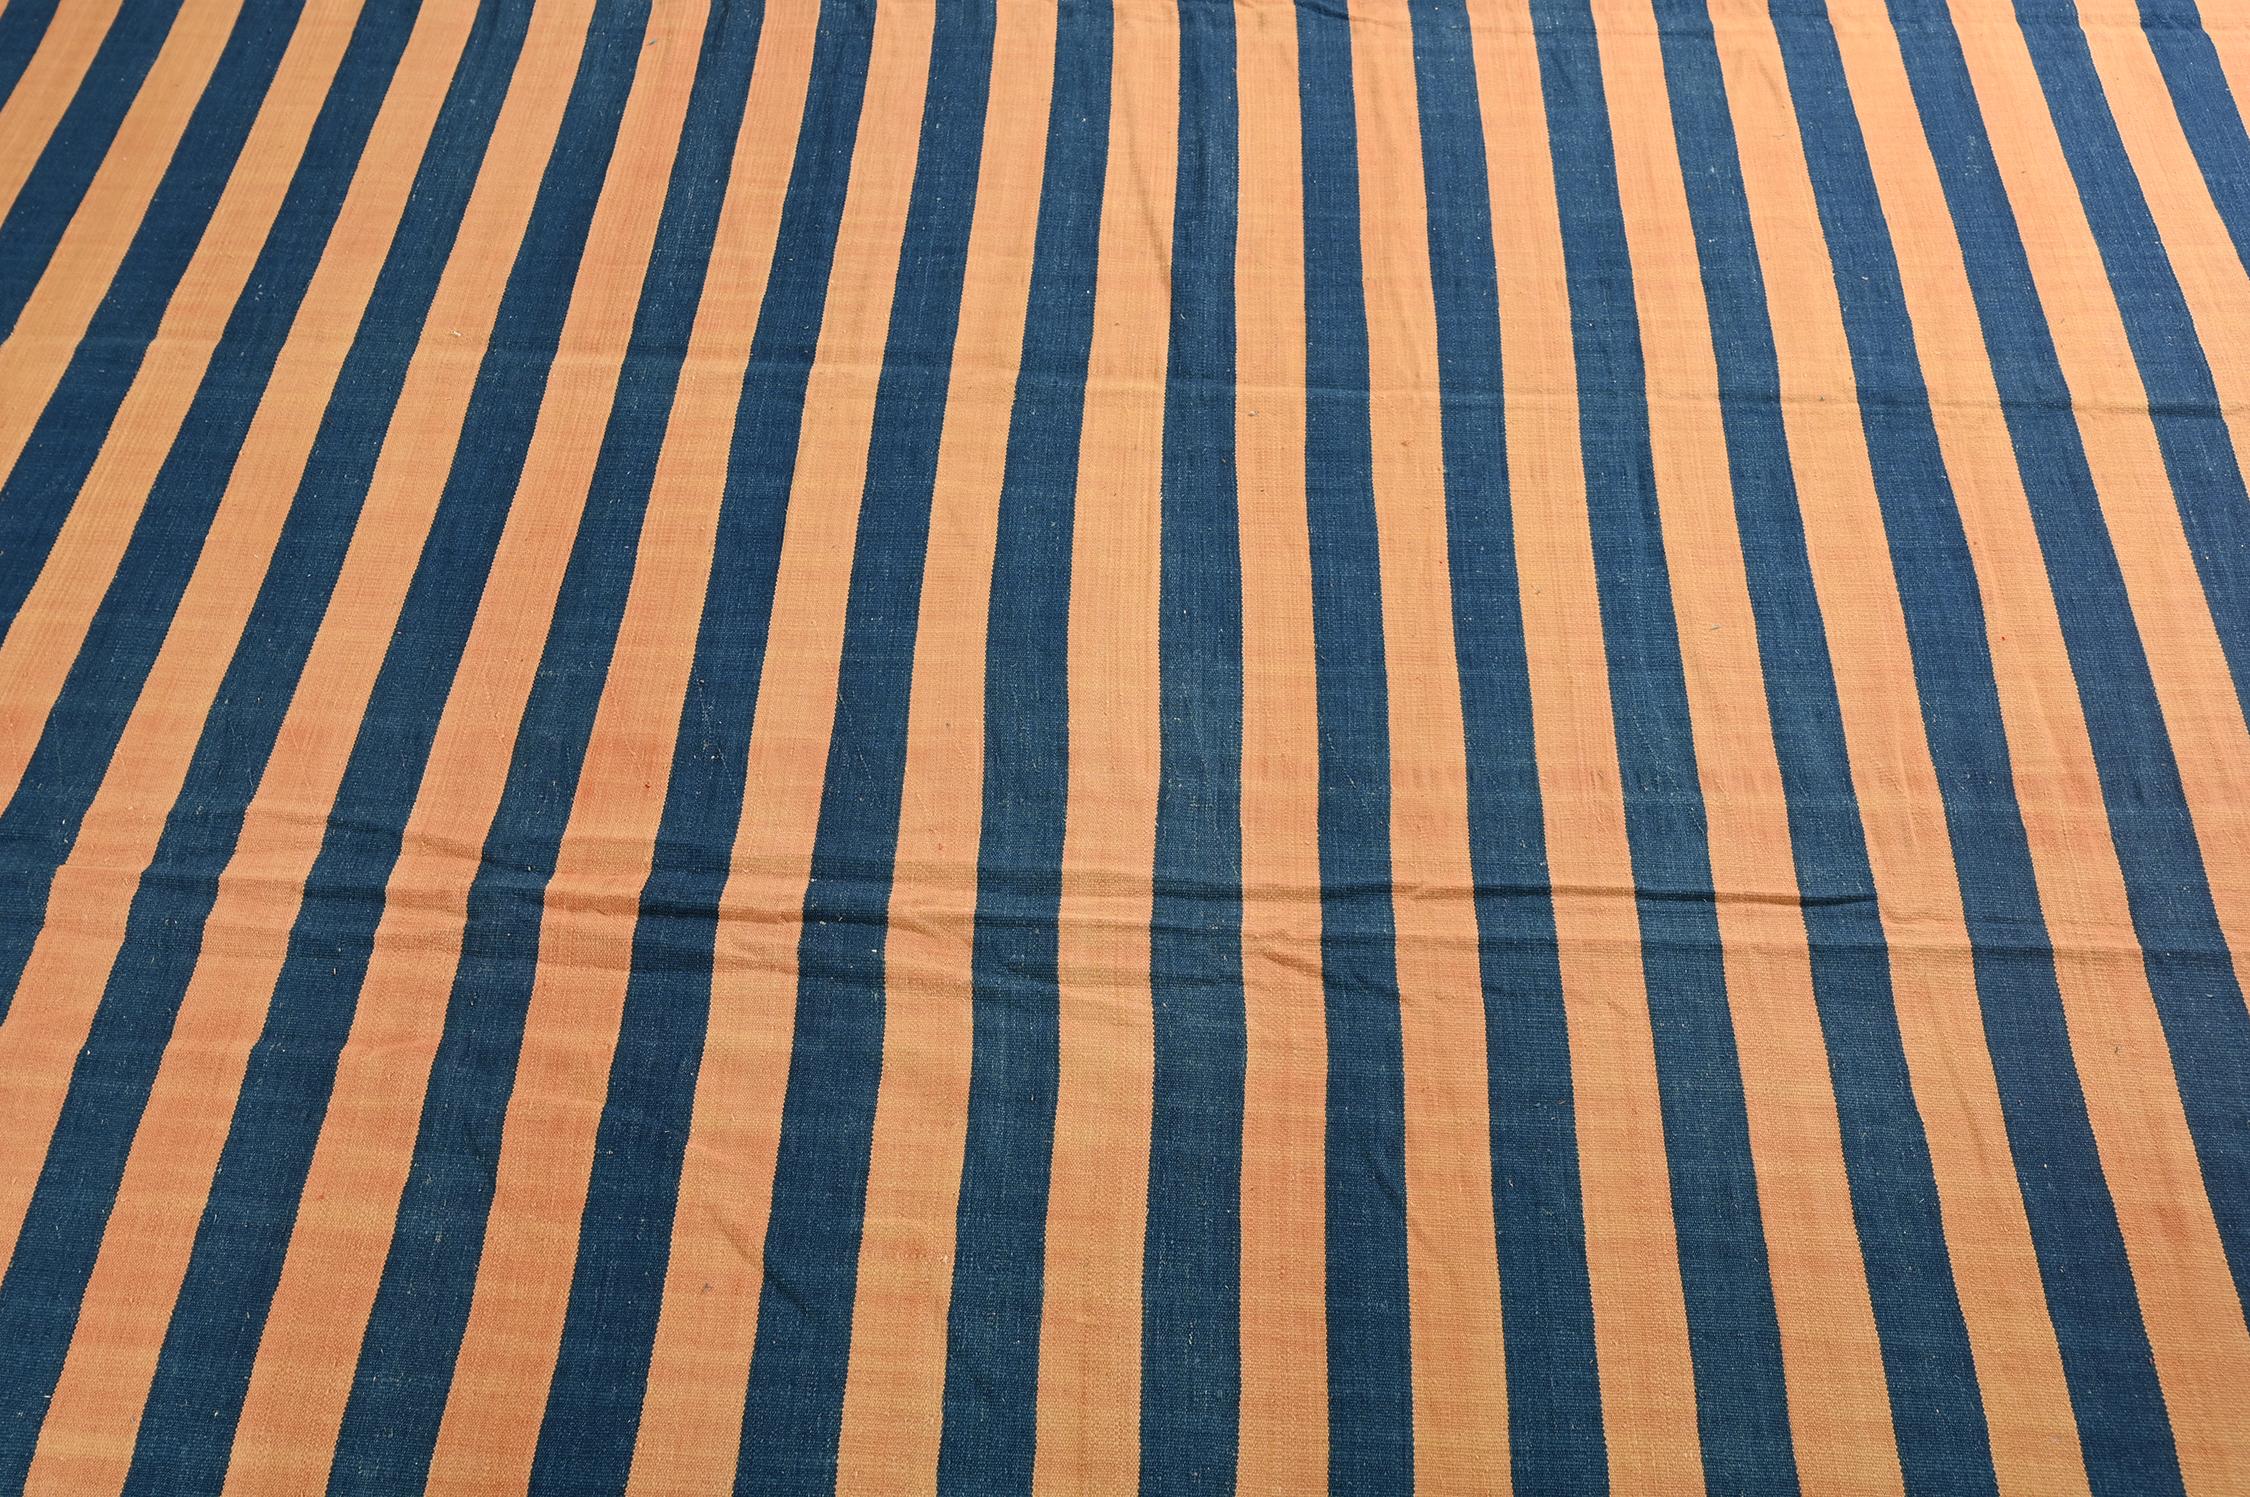 Vintage Dhurrie Flat Weave in Blue and Orange Stripes by Rug & Kilim In Good Condition For Sale In Long Island City, NY